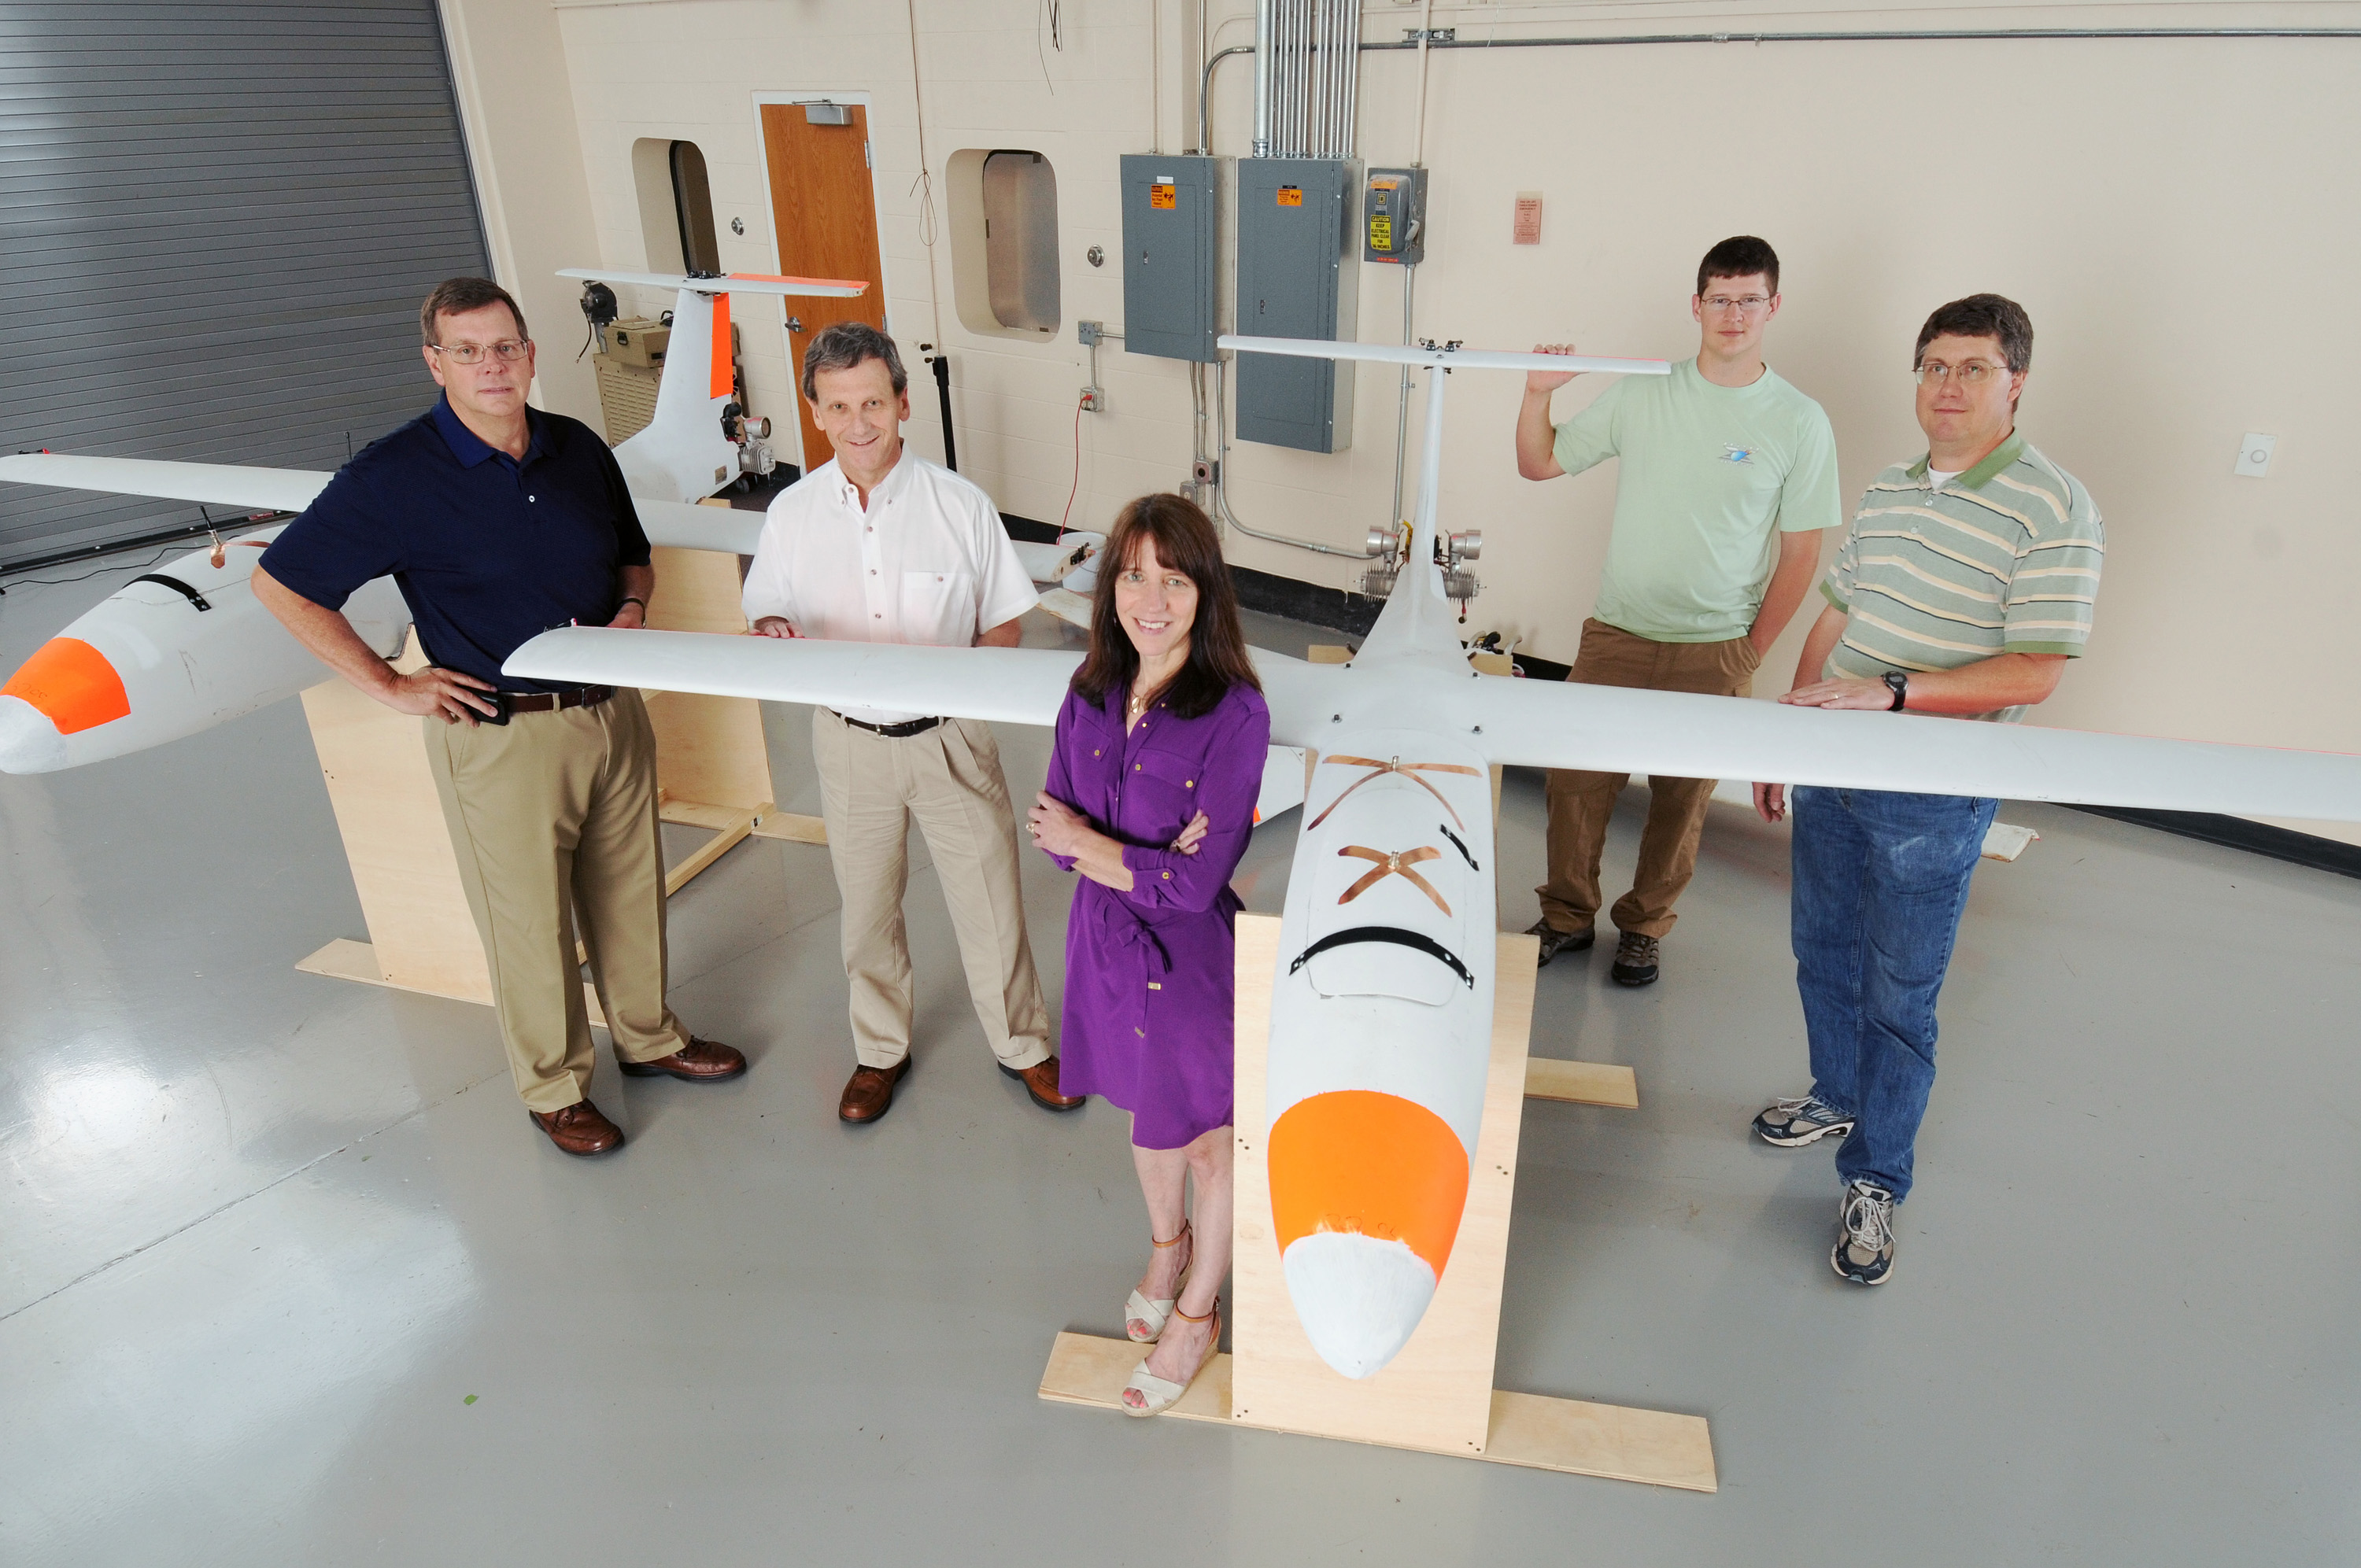 GTRI researchers are shown with two unmanned aerial vehicles used in their research program. The researchers are (l-r) Cliff Eckert, Don Davis, Lora Weiss, Kyle Carnahan and Gary Gray. (Photo: Gary Meek)